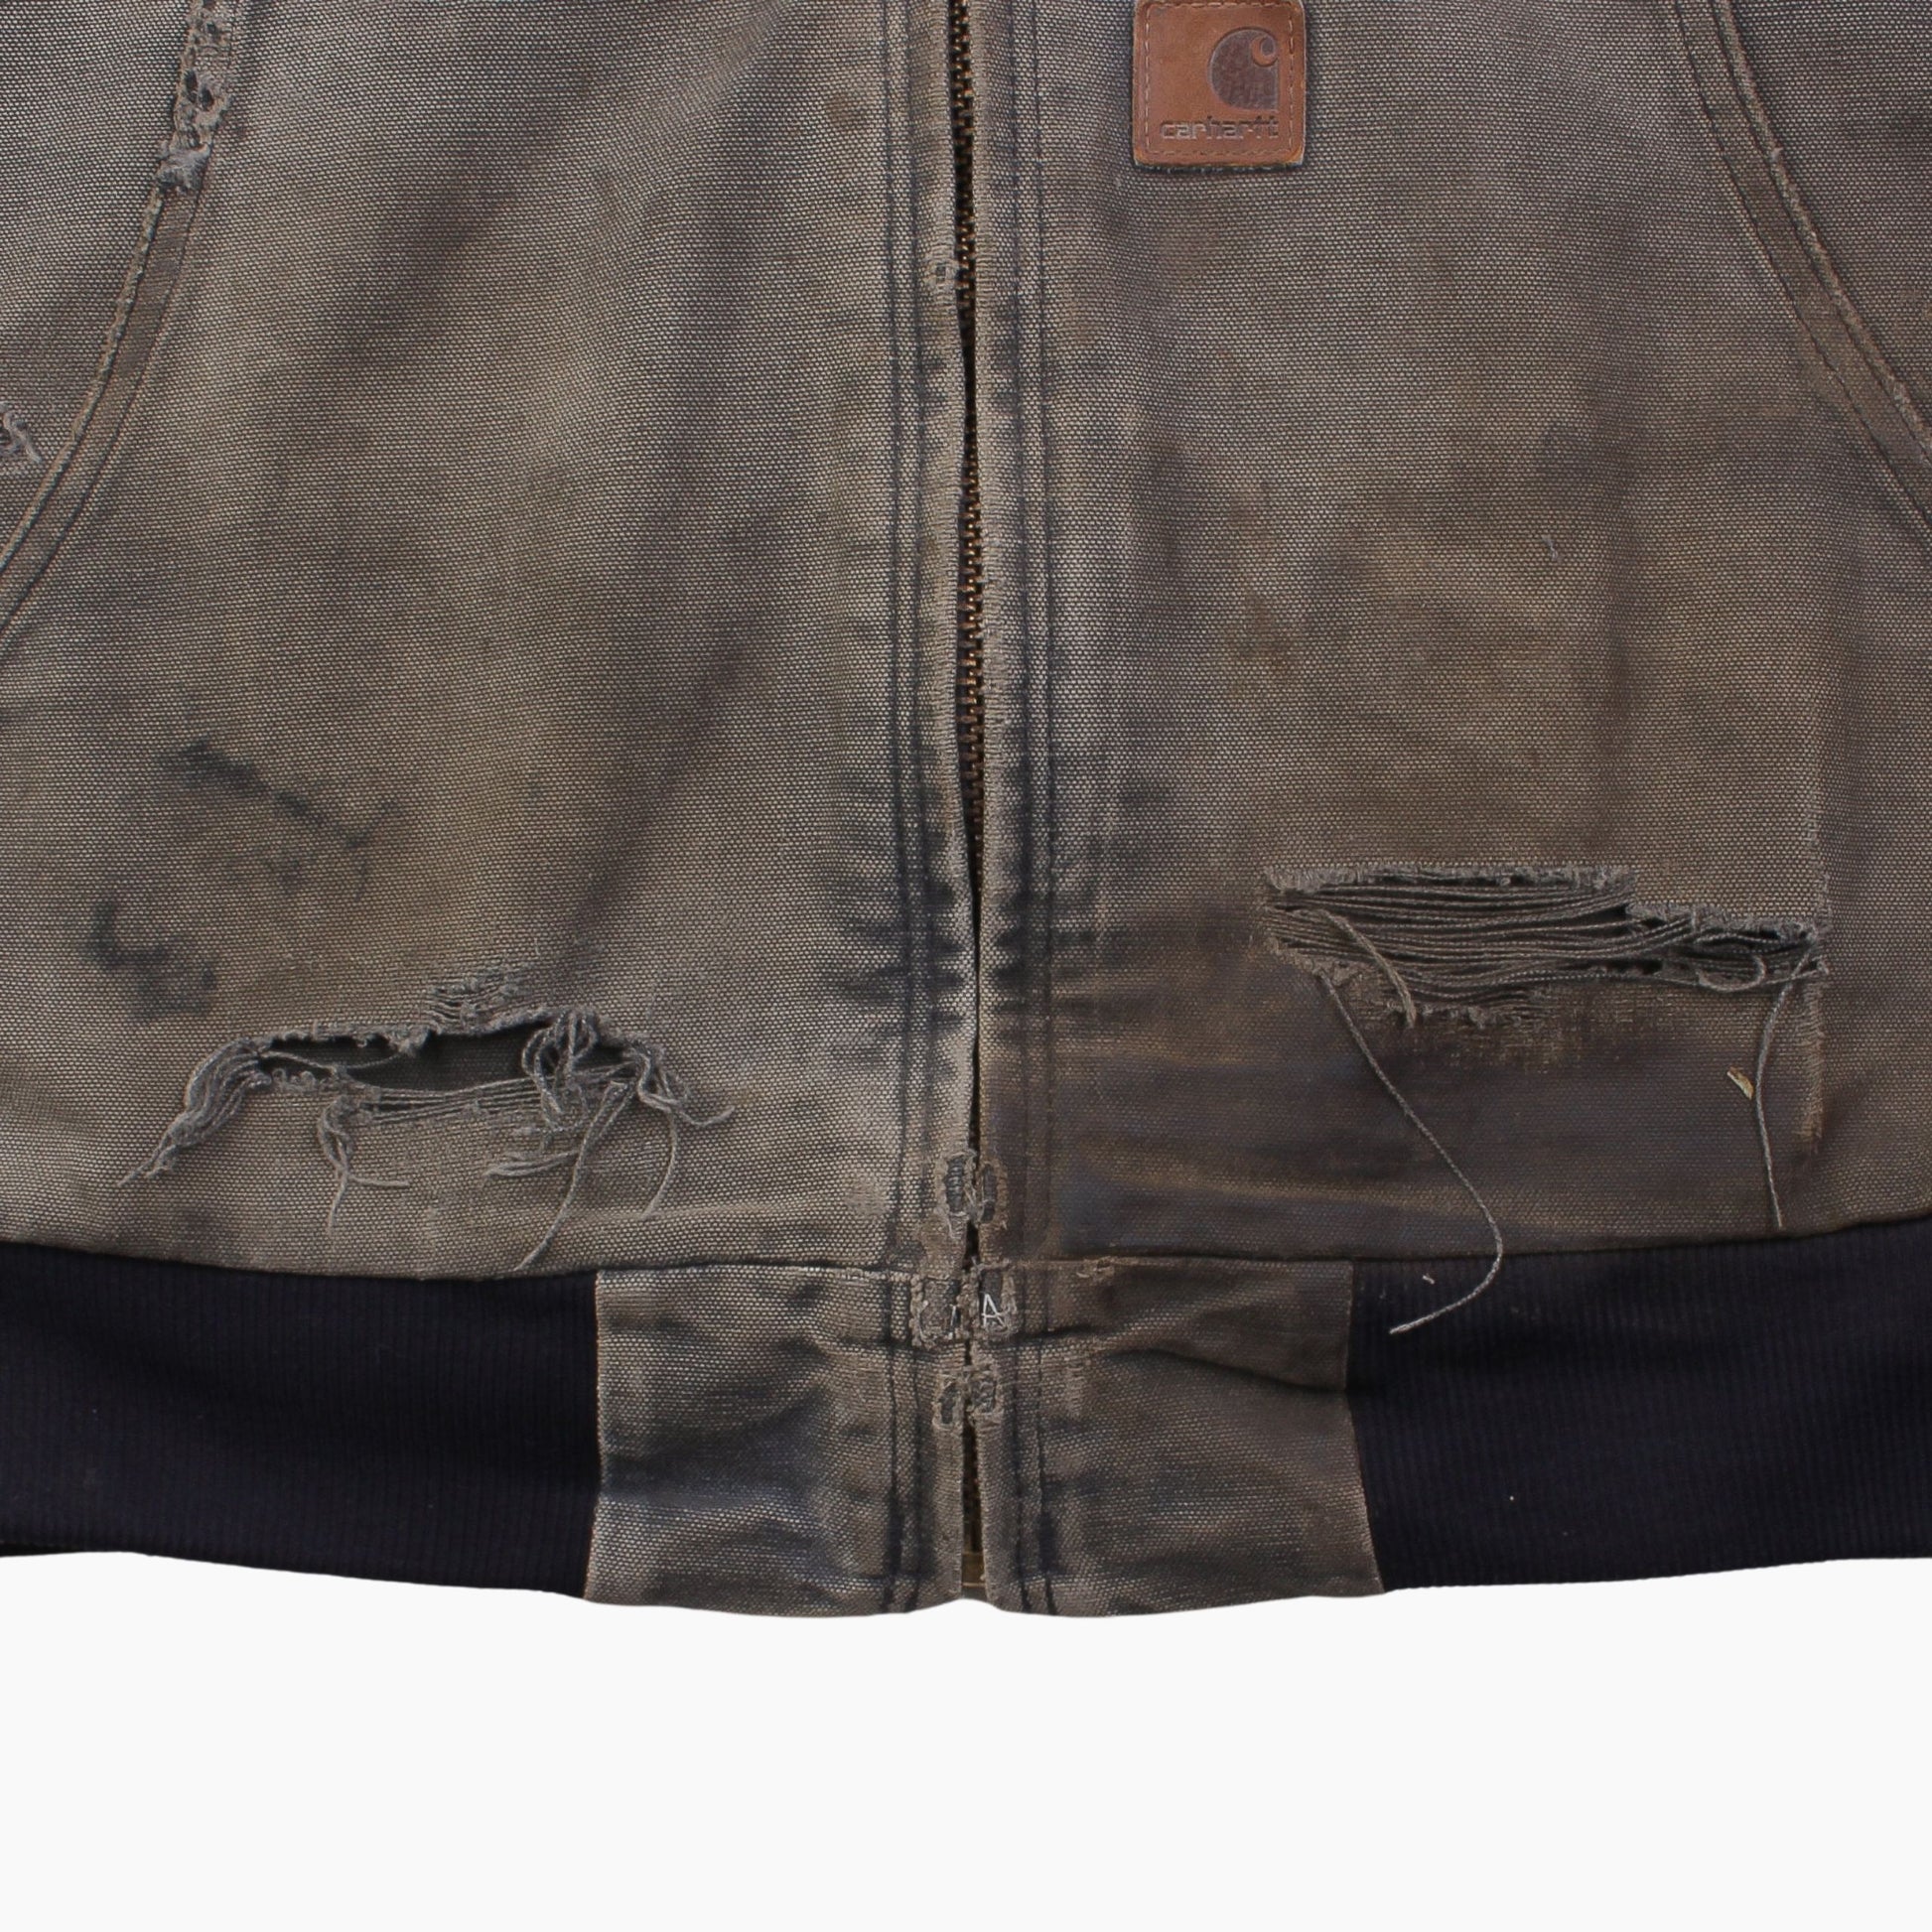 Lined Vest - Washed Black - American Madness